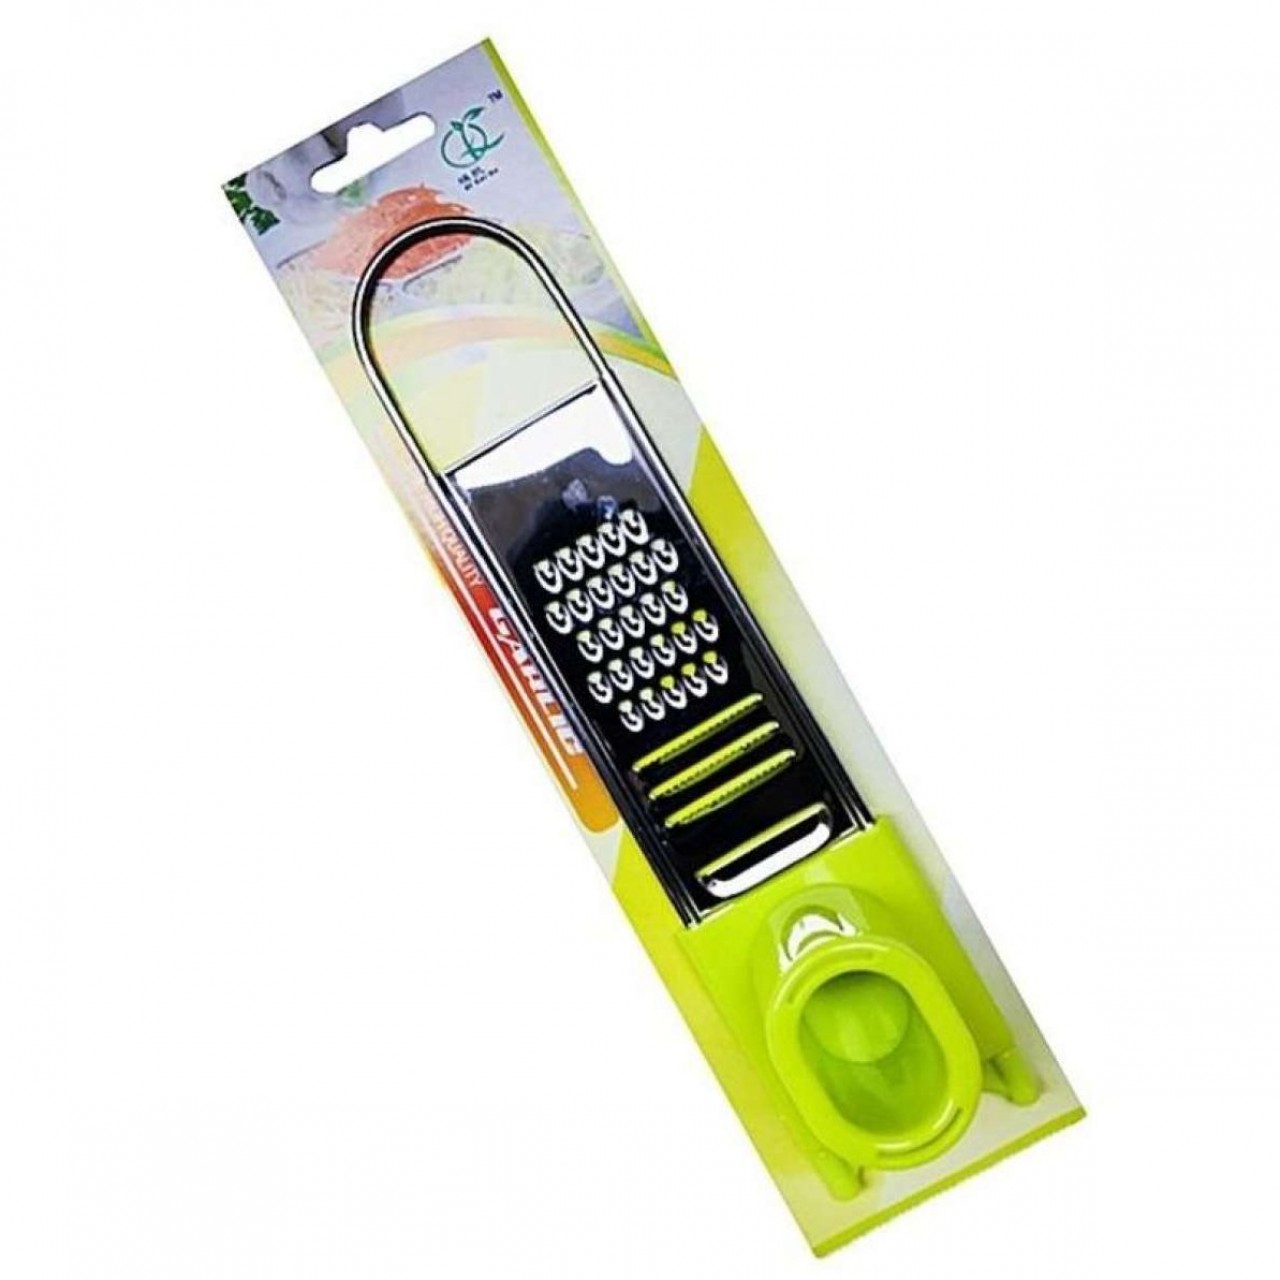 Universal 4 Way Vegetable Grater and Slicer - Green